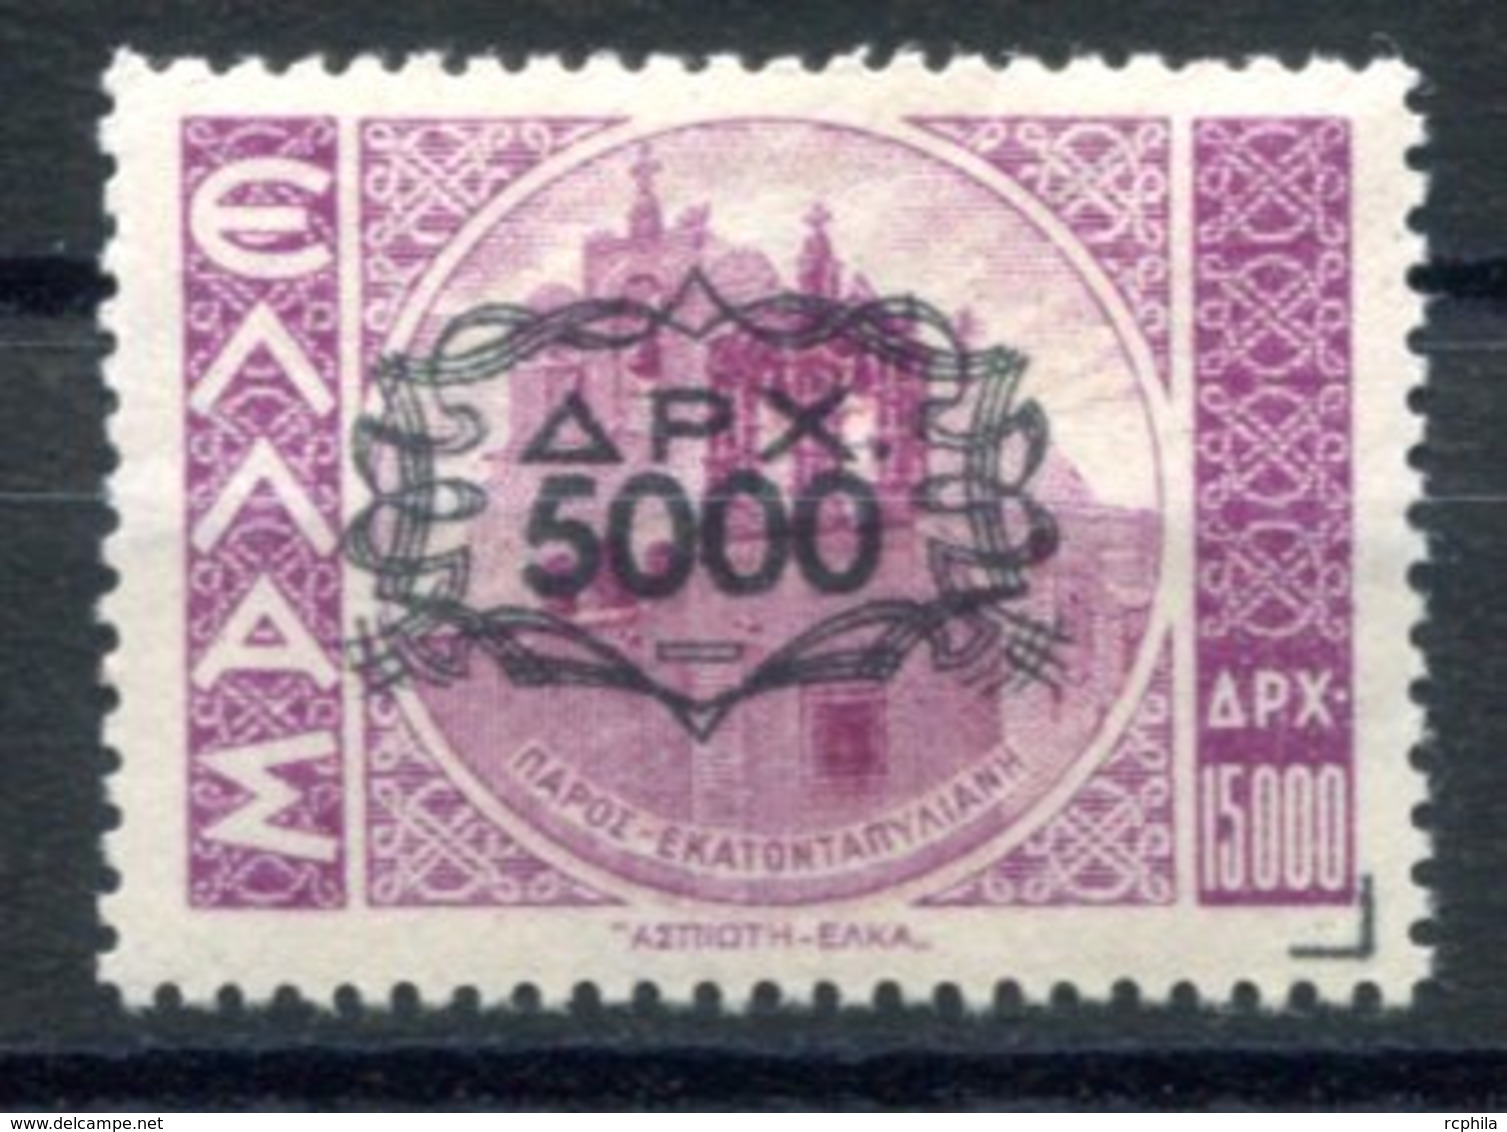 RC 17015 GRECE COTE 198€ N° 533 - 5000d SUR 15000 NEUF ** TB MNH VF - Unused Stamps